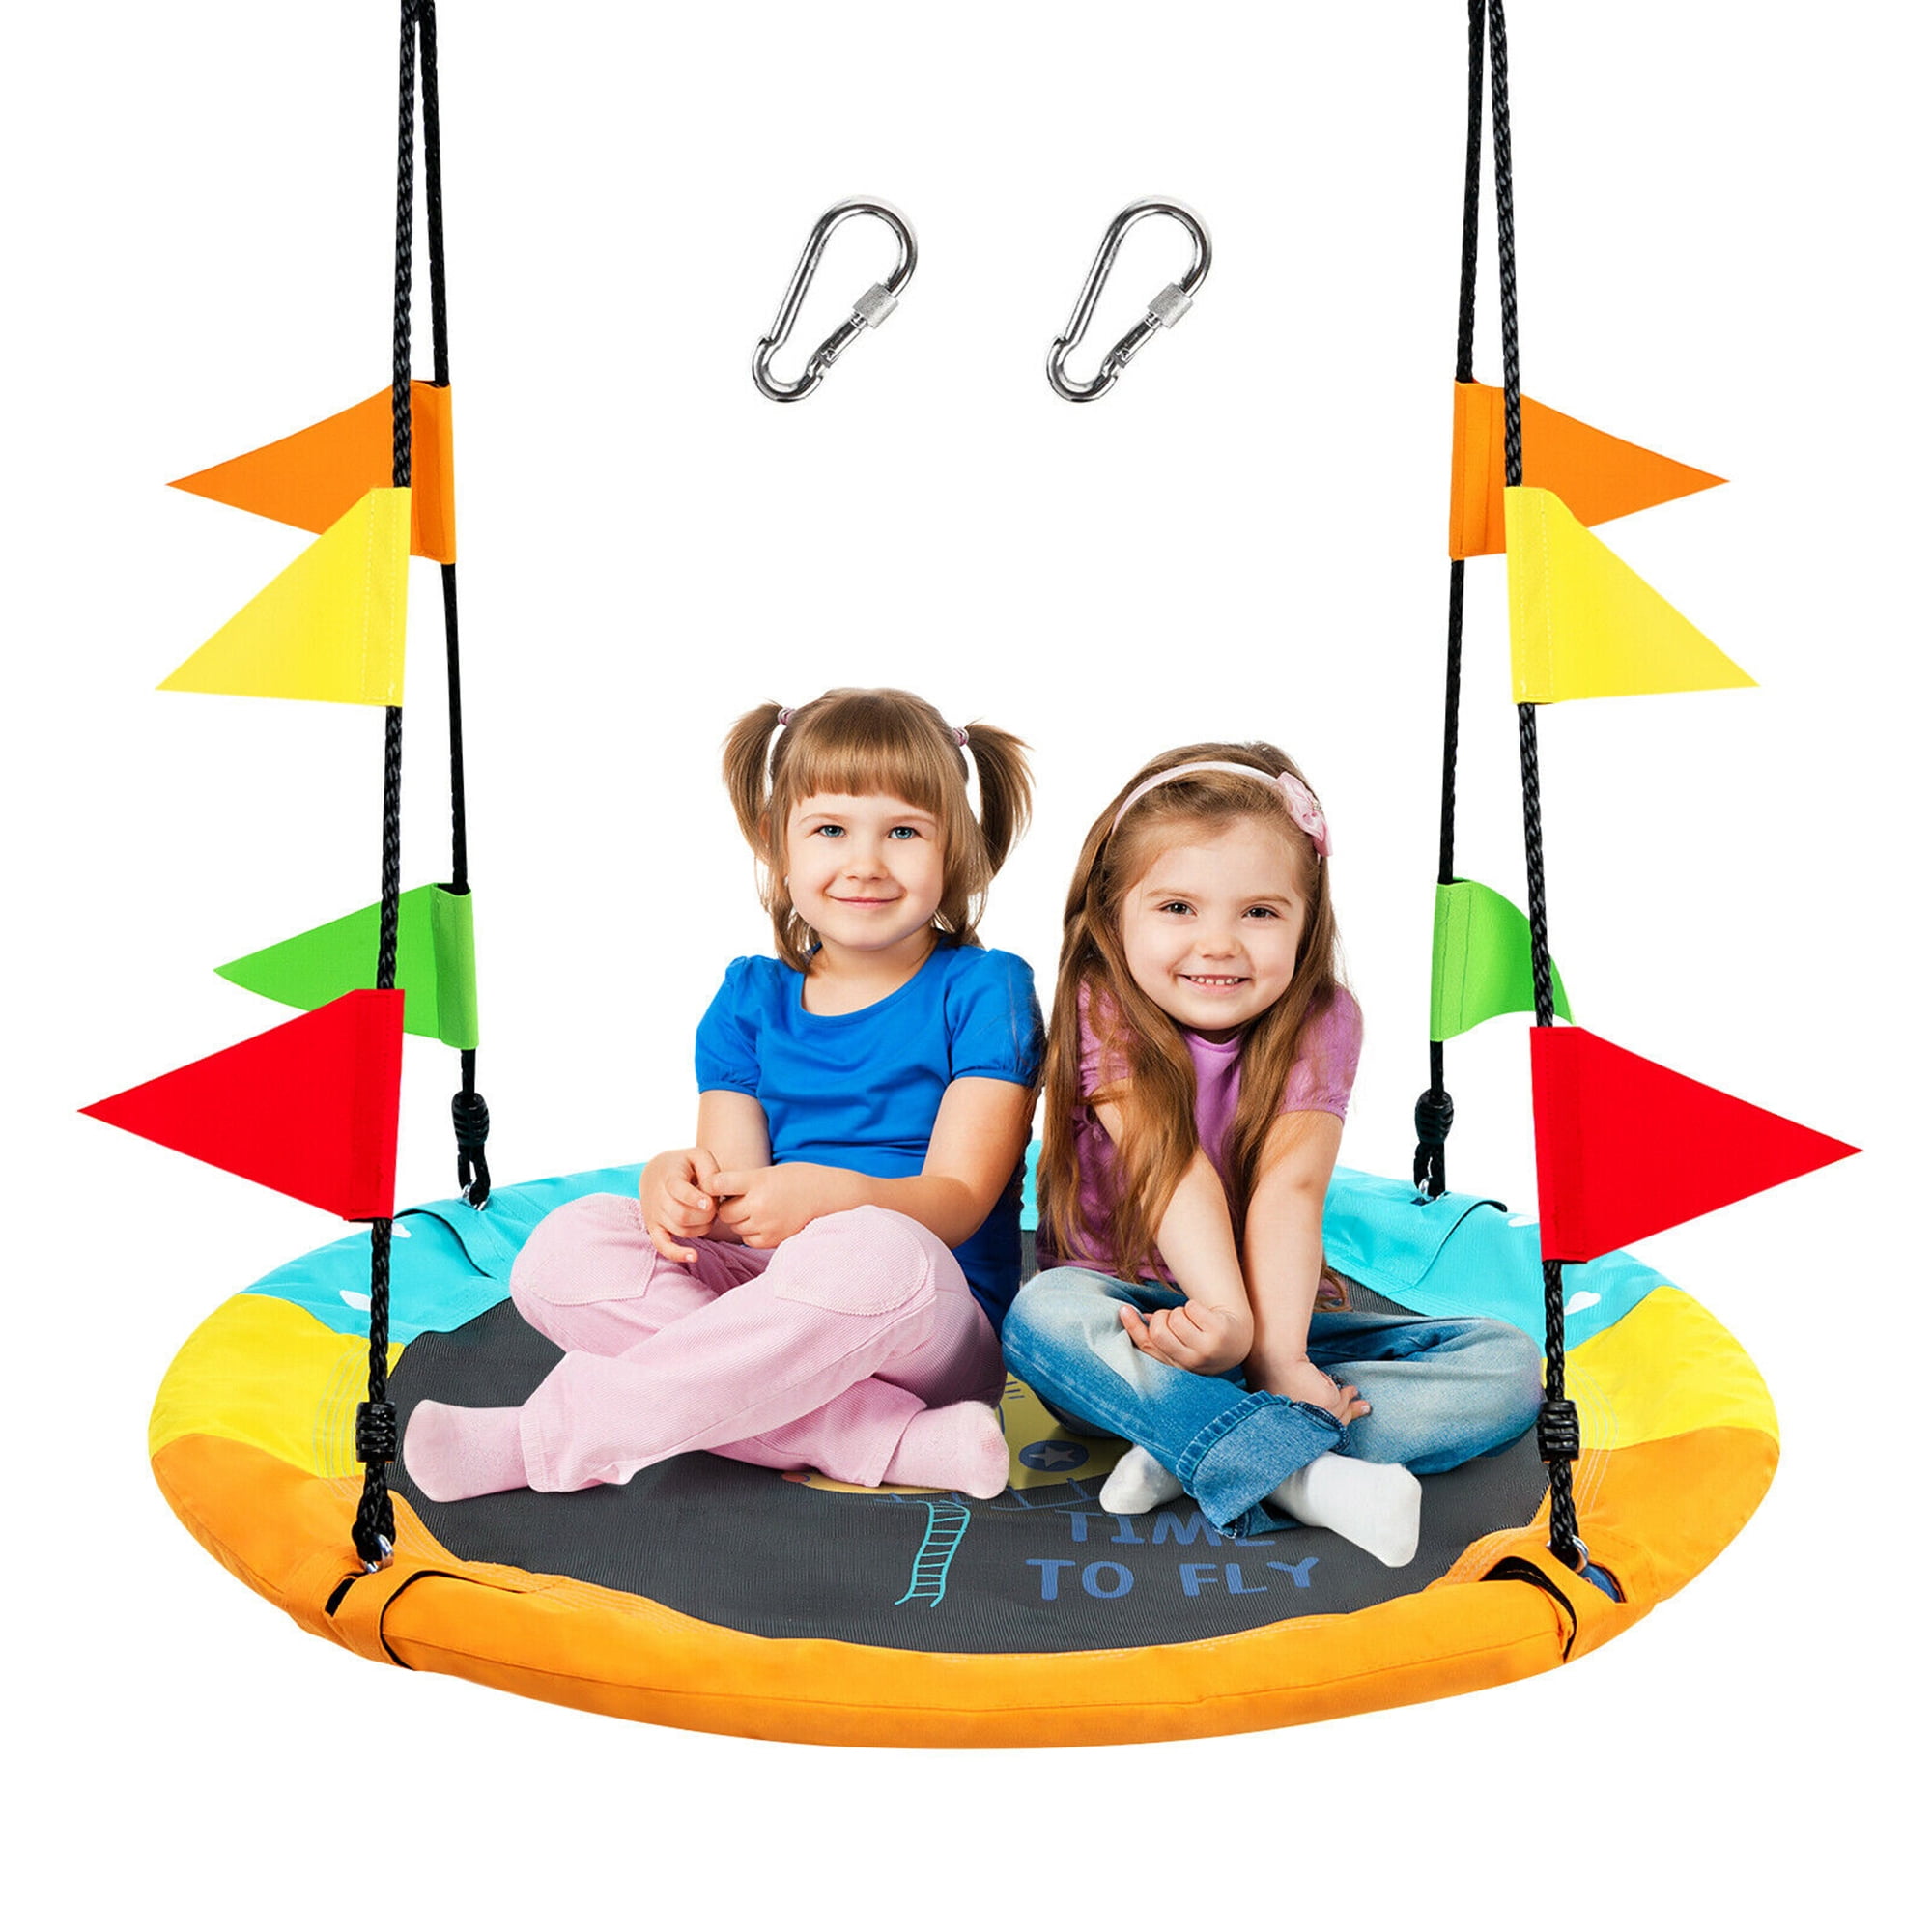 40" Flying Saucer Tree Swing 700lbs Oxford Fabric for Kids In/Outdoor Swing Toys